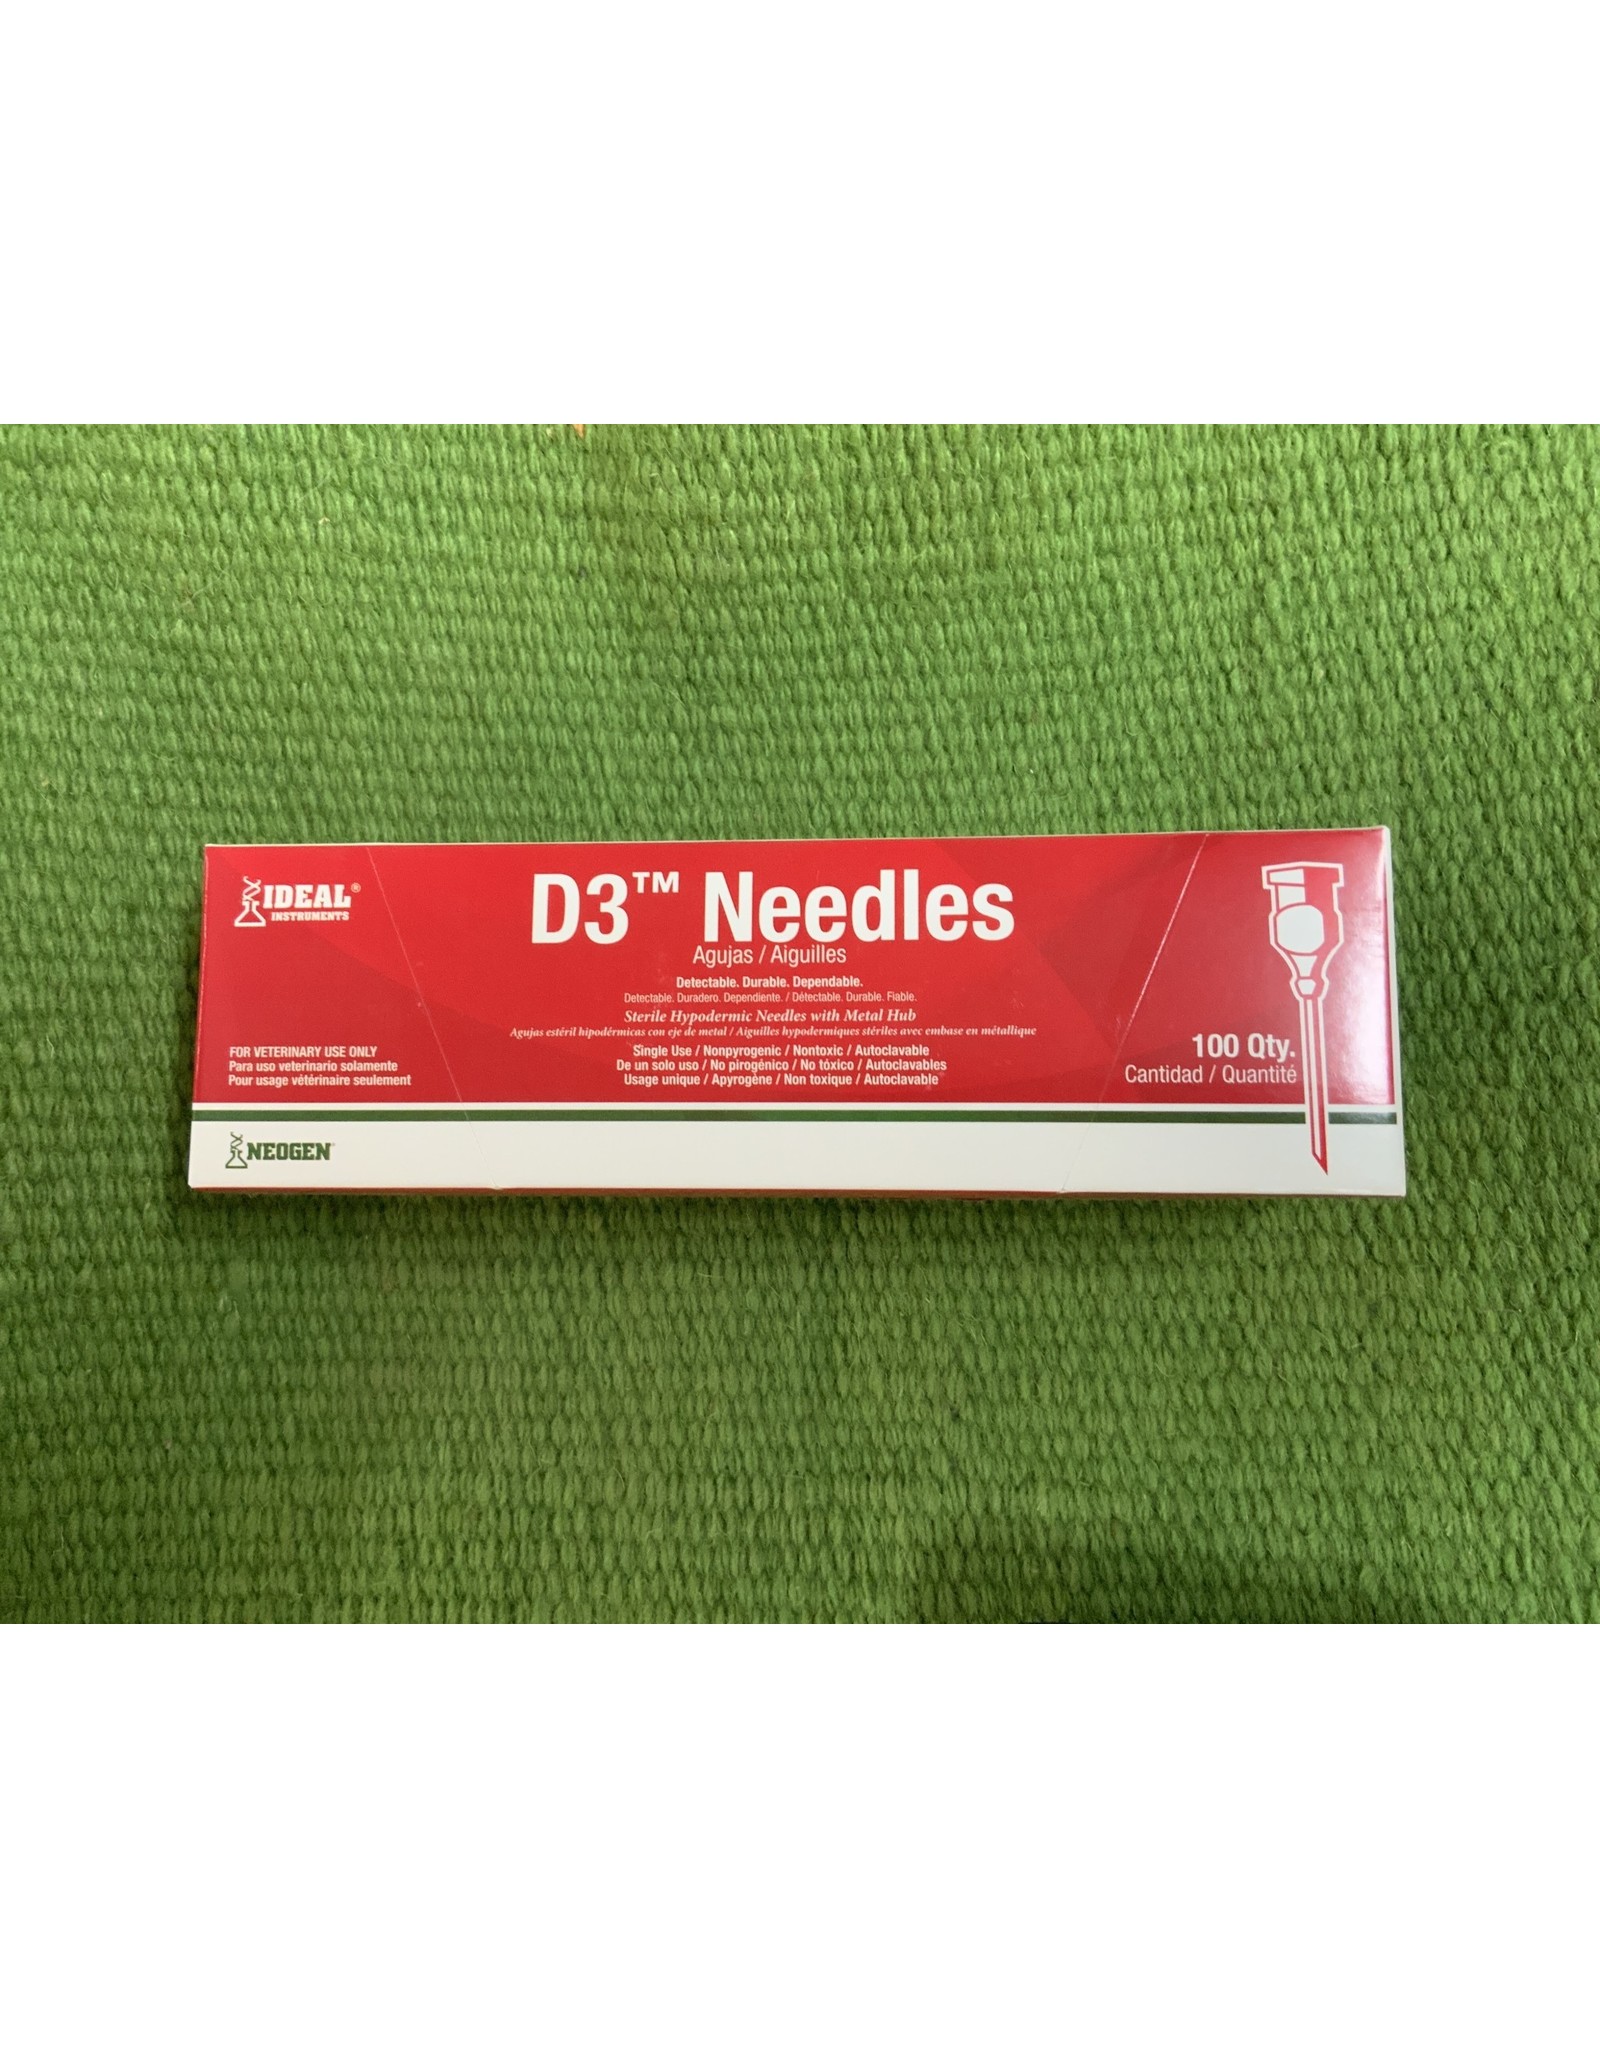 BOX NEEDLES* Ideal D3 Needle 18x5/8 100pk    - These are detectible  so if they break they break in the animal they can be found - they are Aluminum and stronger then regular needles - they are a safety needle034-225